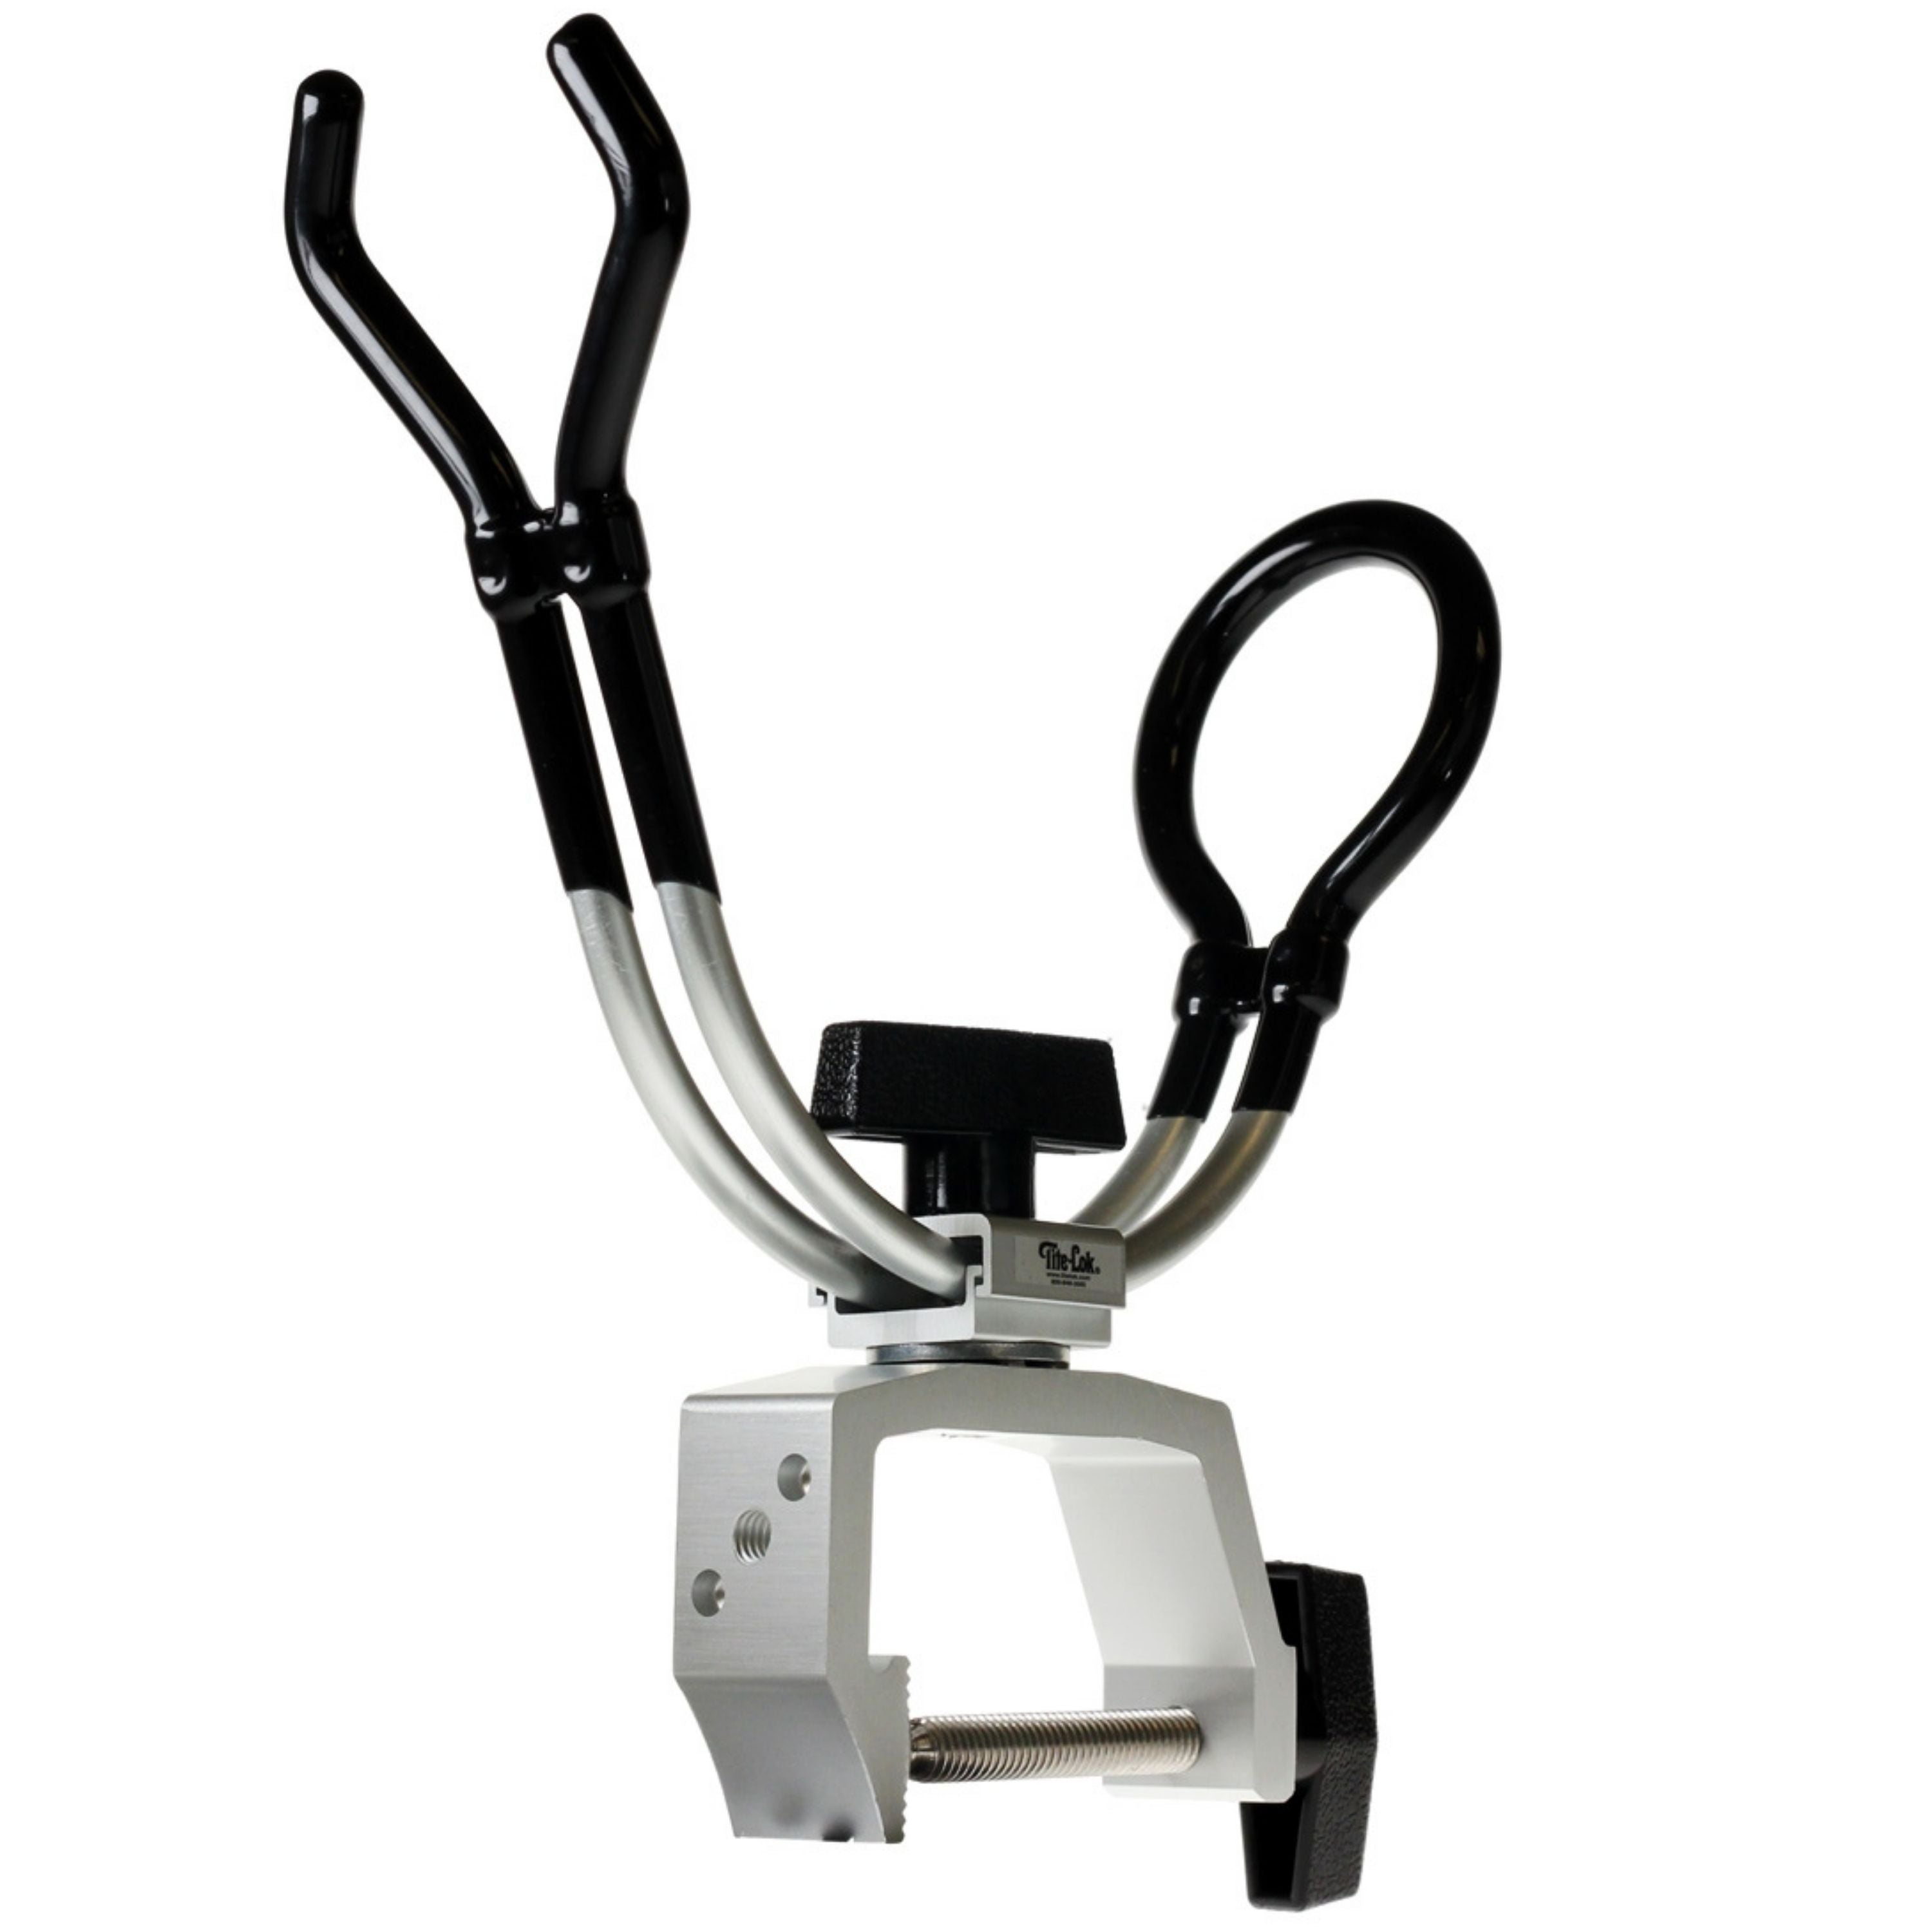 Rod holder with C-clamp mount